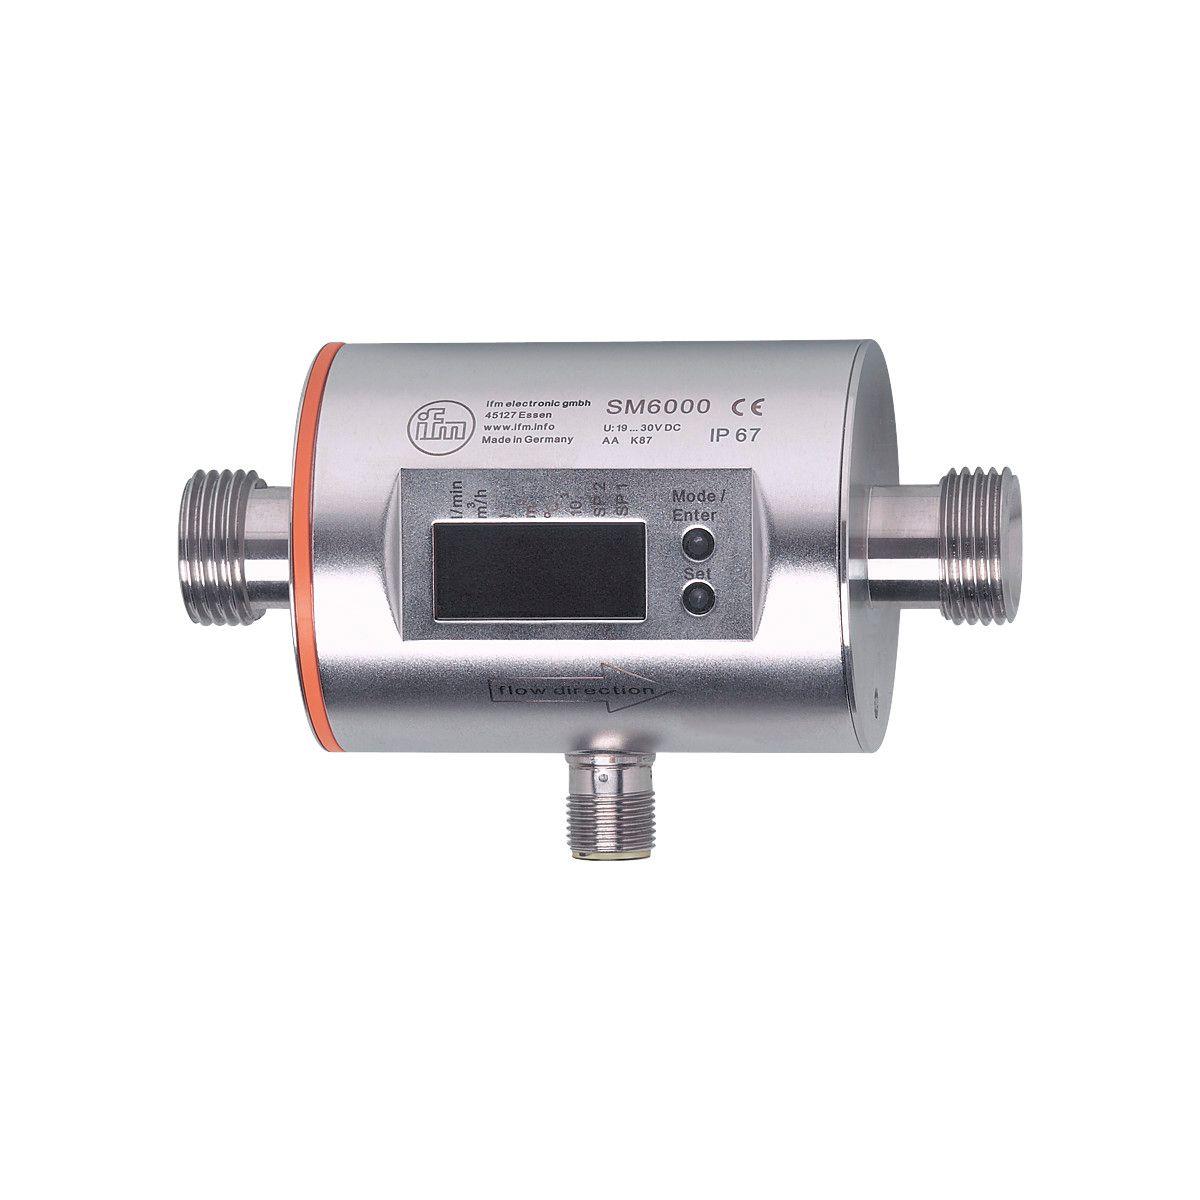 ifm Electronic SM6004 Magnetic-inductive flow meter, Precise measurement of flow, consumption and medium temperature, Number of inputs and outputs: Number of analog outputs: 2, Measuring range: 0.1...25 l/min 0.03...6.6 gpm, Process connection: threaded connection G 1/2 DN15 f